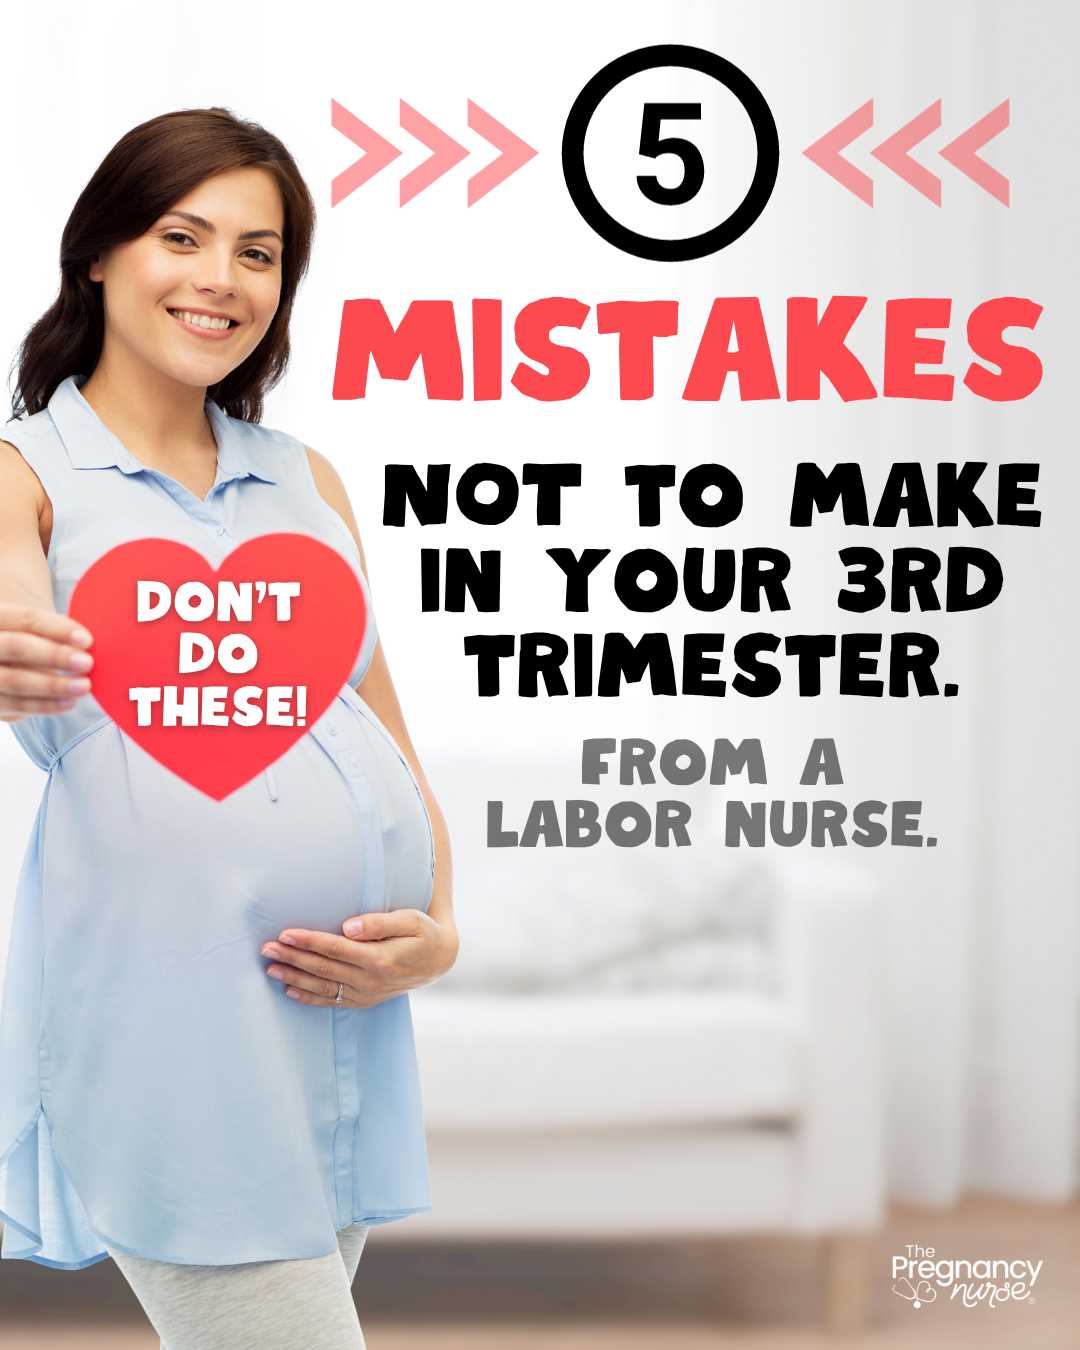 pregnant woman with a heart that says Don't do these! / 5 mistakes not to mak in your third trimester from a labor nurse